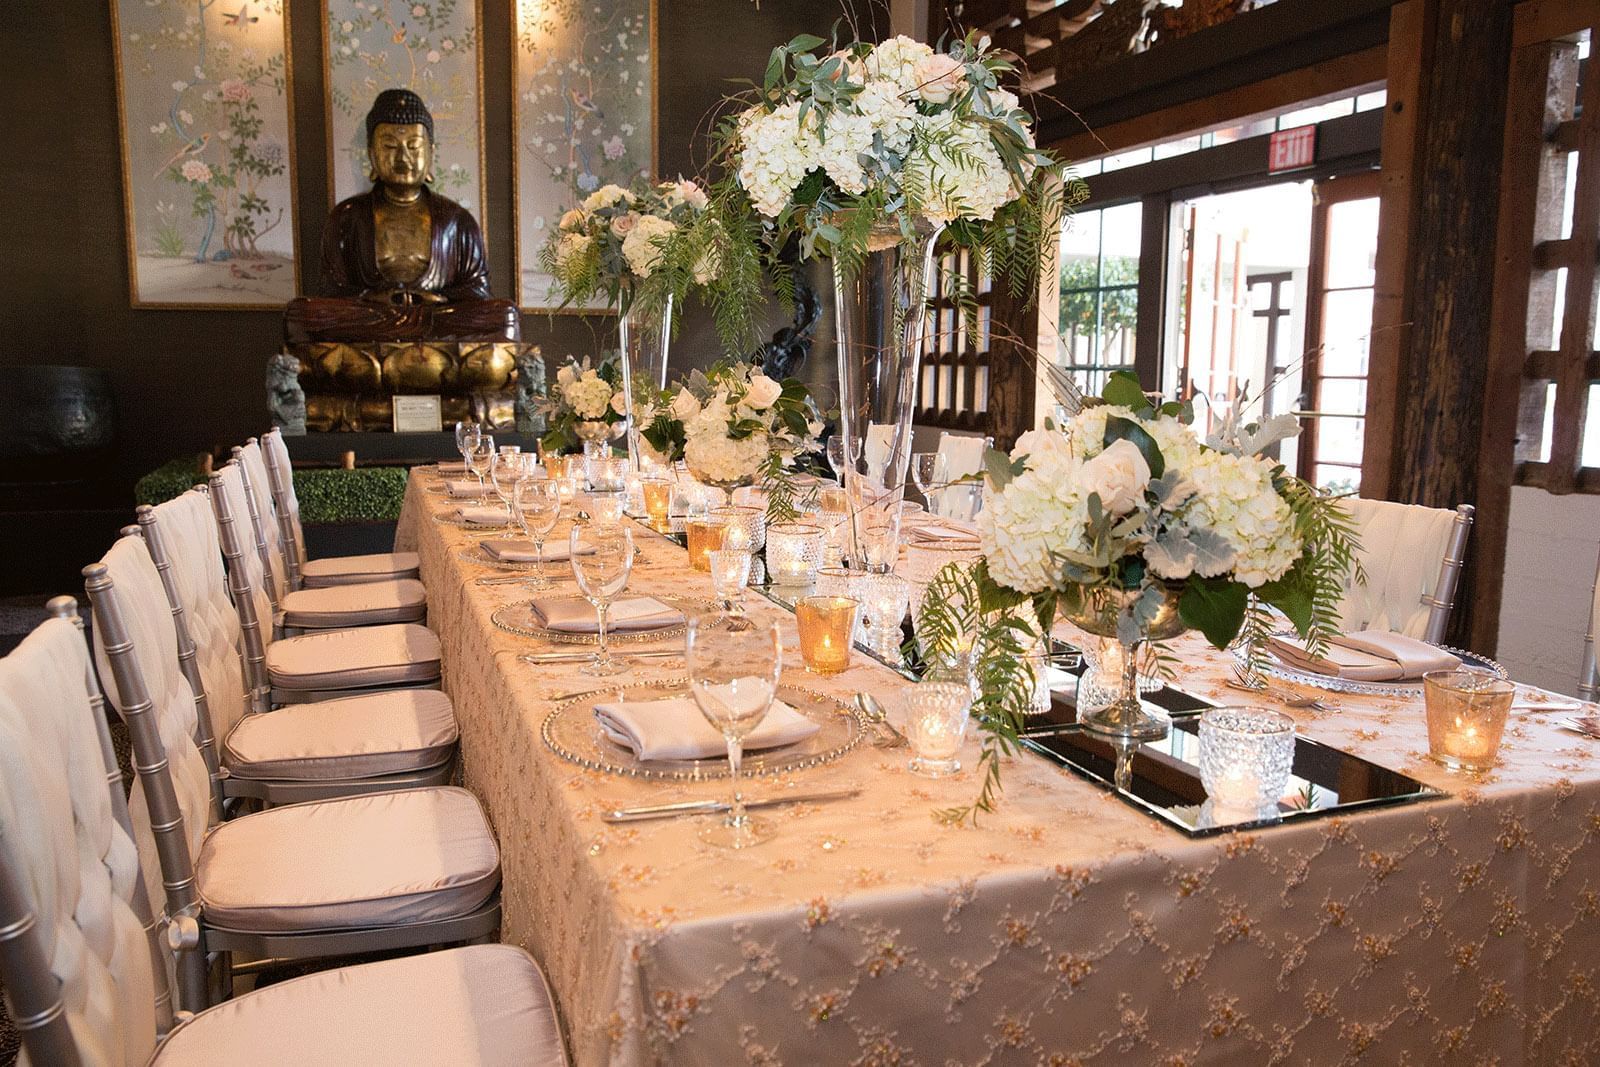 banquet room with decorated table and flowers